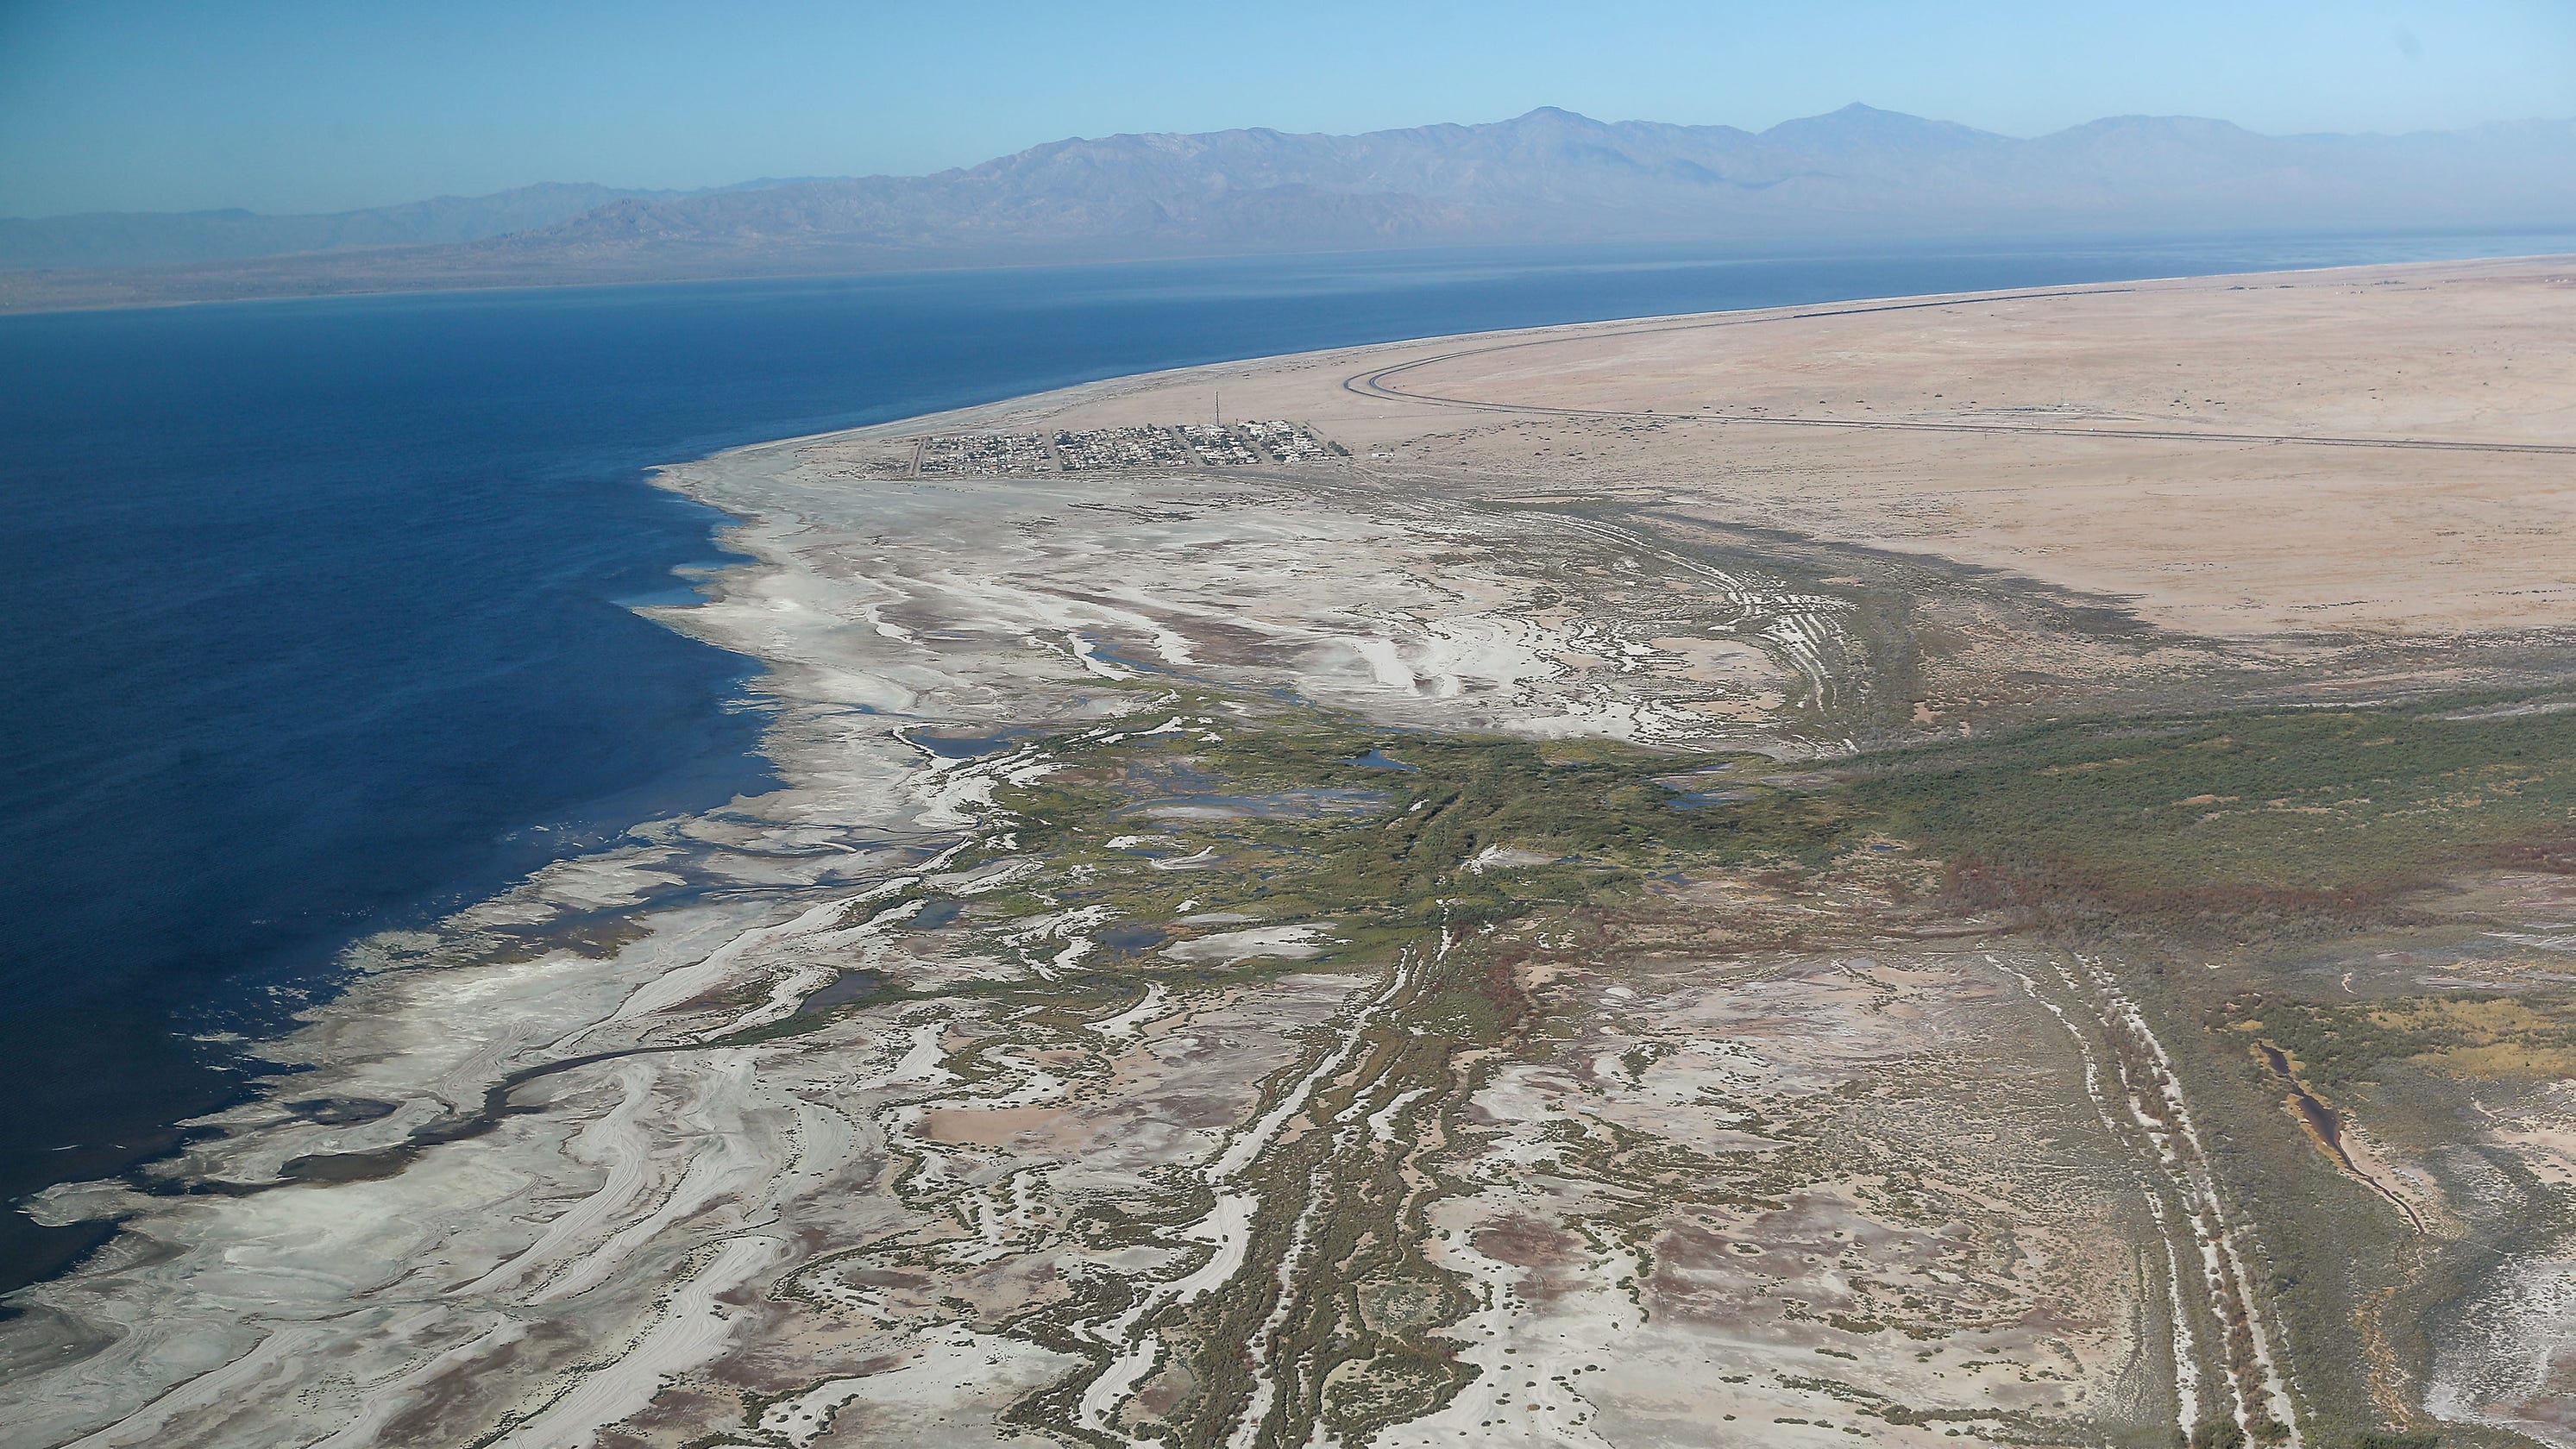 Well-known Salton Sea origin story questioned by new research, suggesting it wasn't 'accidental' - Desert Sun